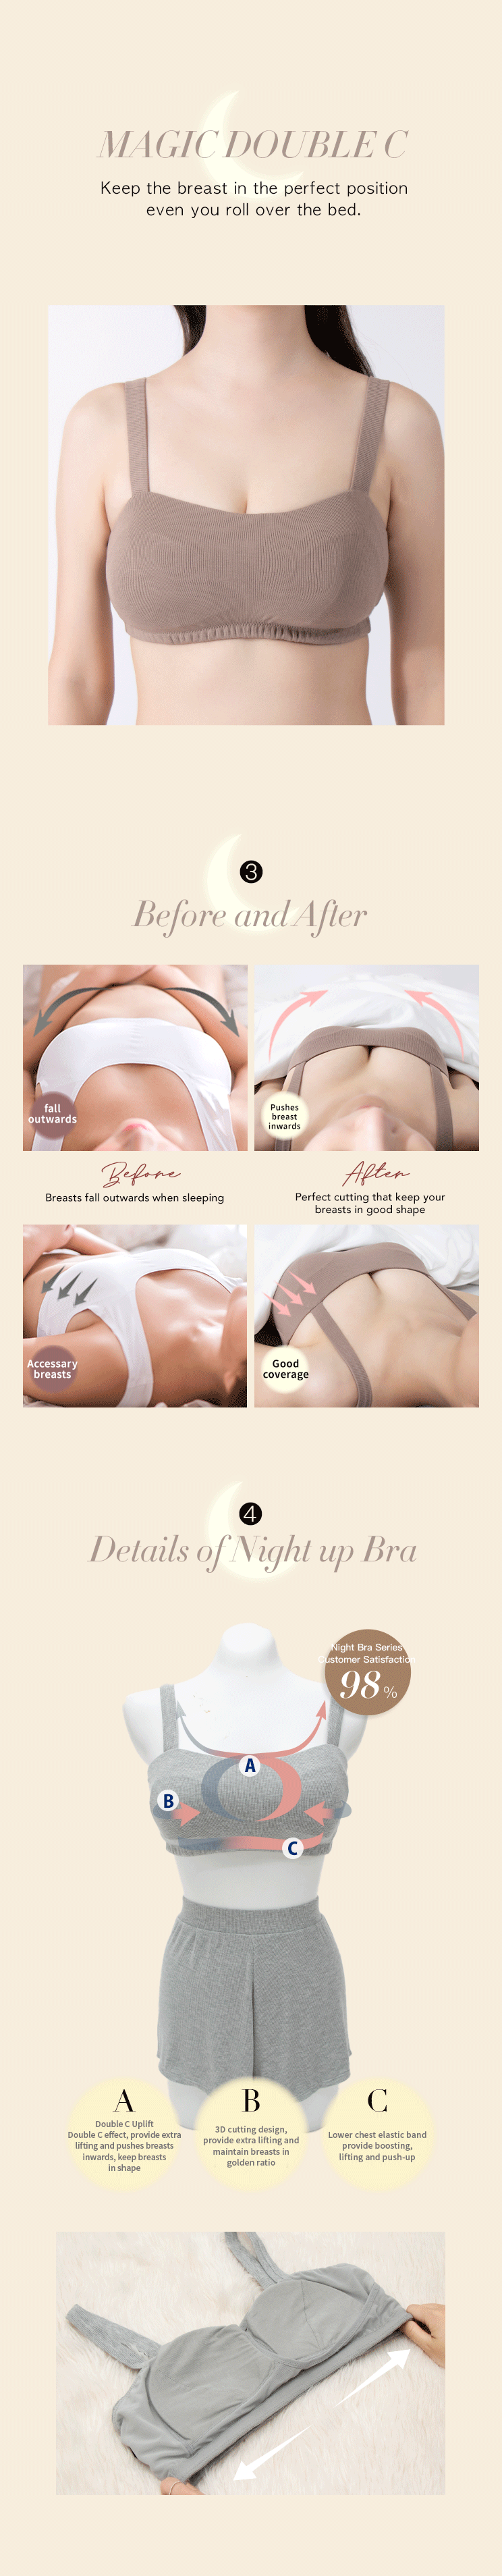 While Sleeping - Bra On Or Off?